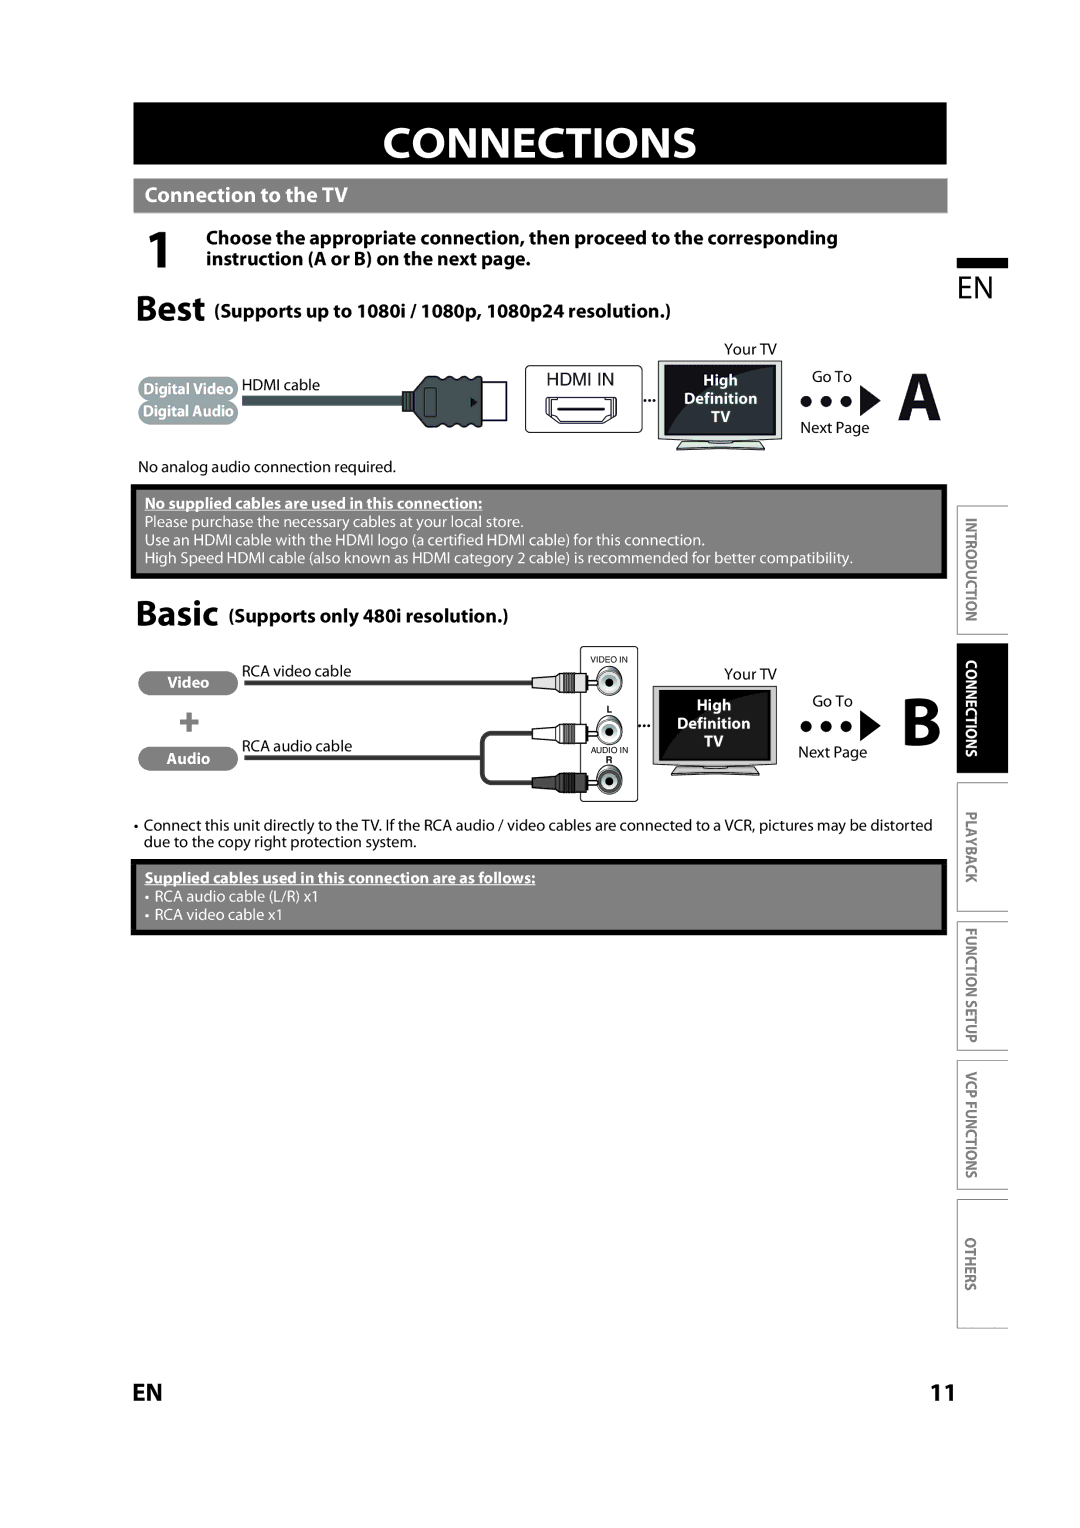 Magnavox MBP110V/F7 owner manual Connections, Connection to the TV, Basic Supports only 480i resolution 